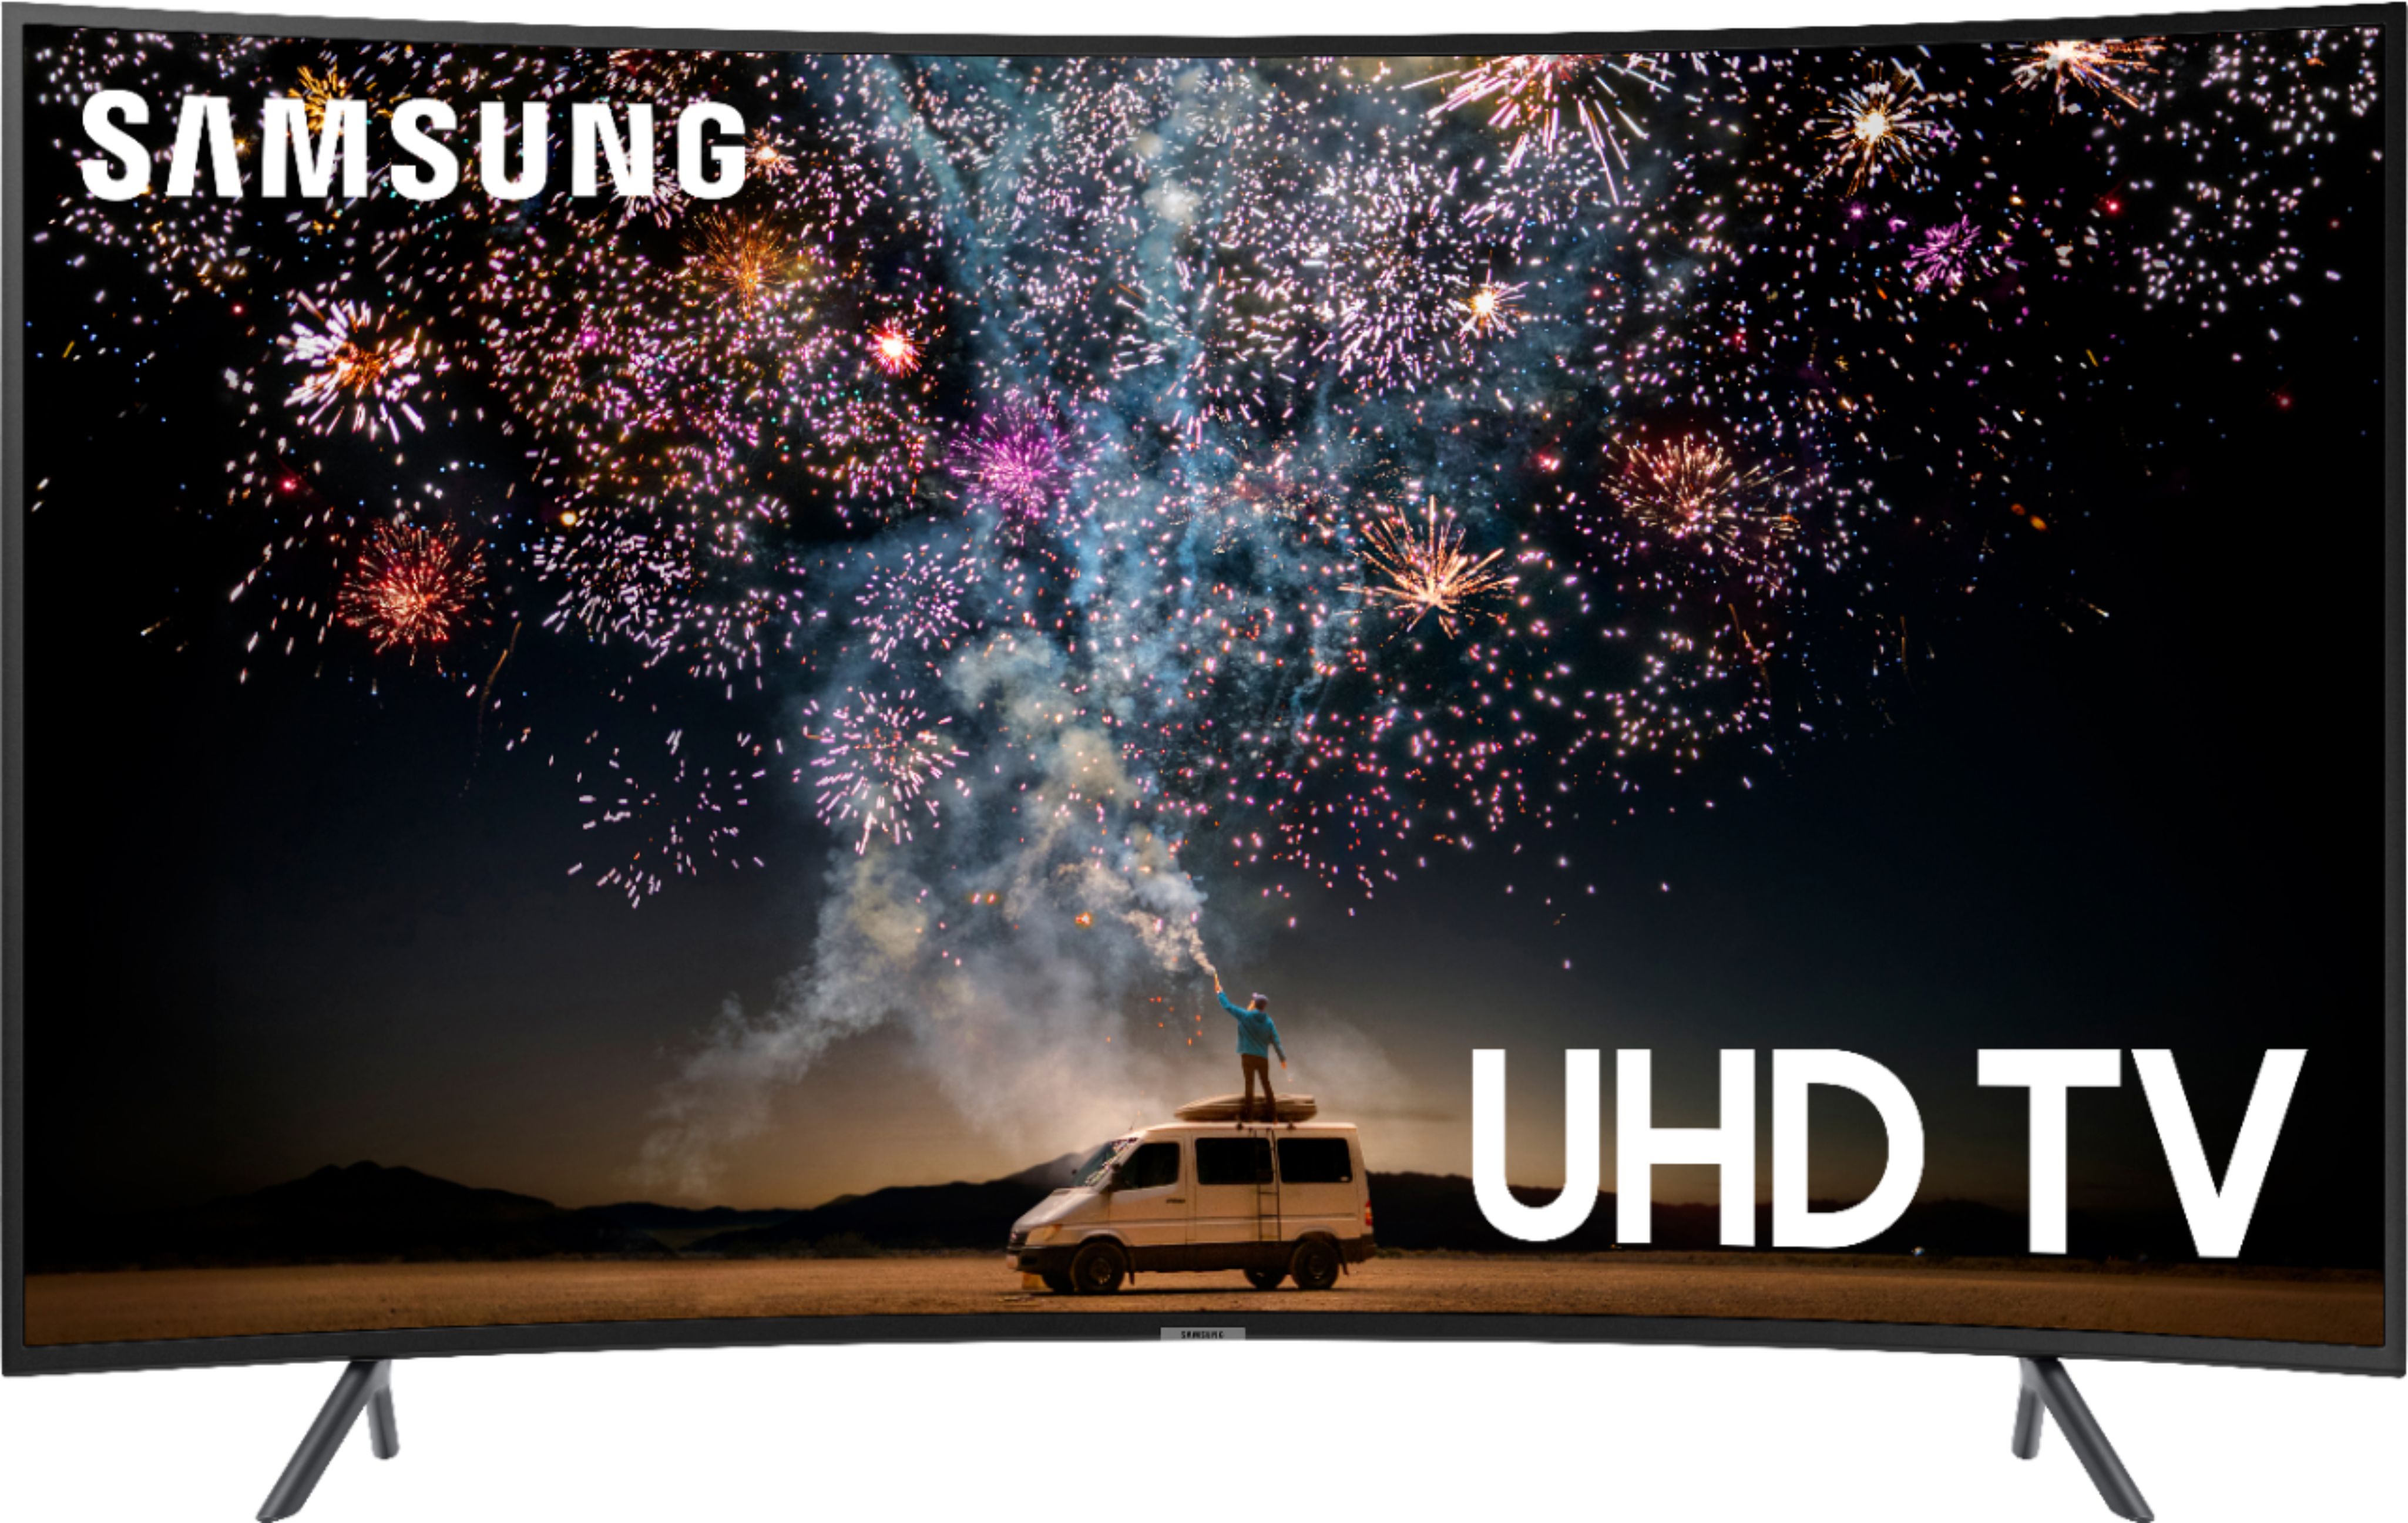 Samsung - 55" Class - LED - Curved - 7 Series - 2160p - Smart - 4K UHD TV with HDR